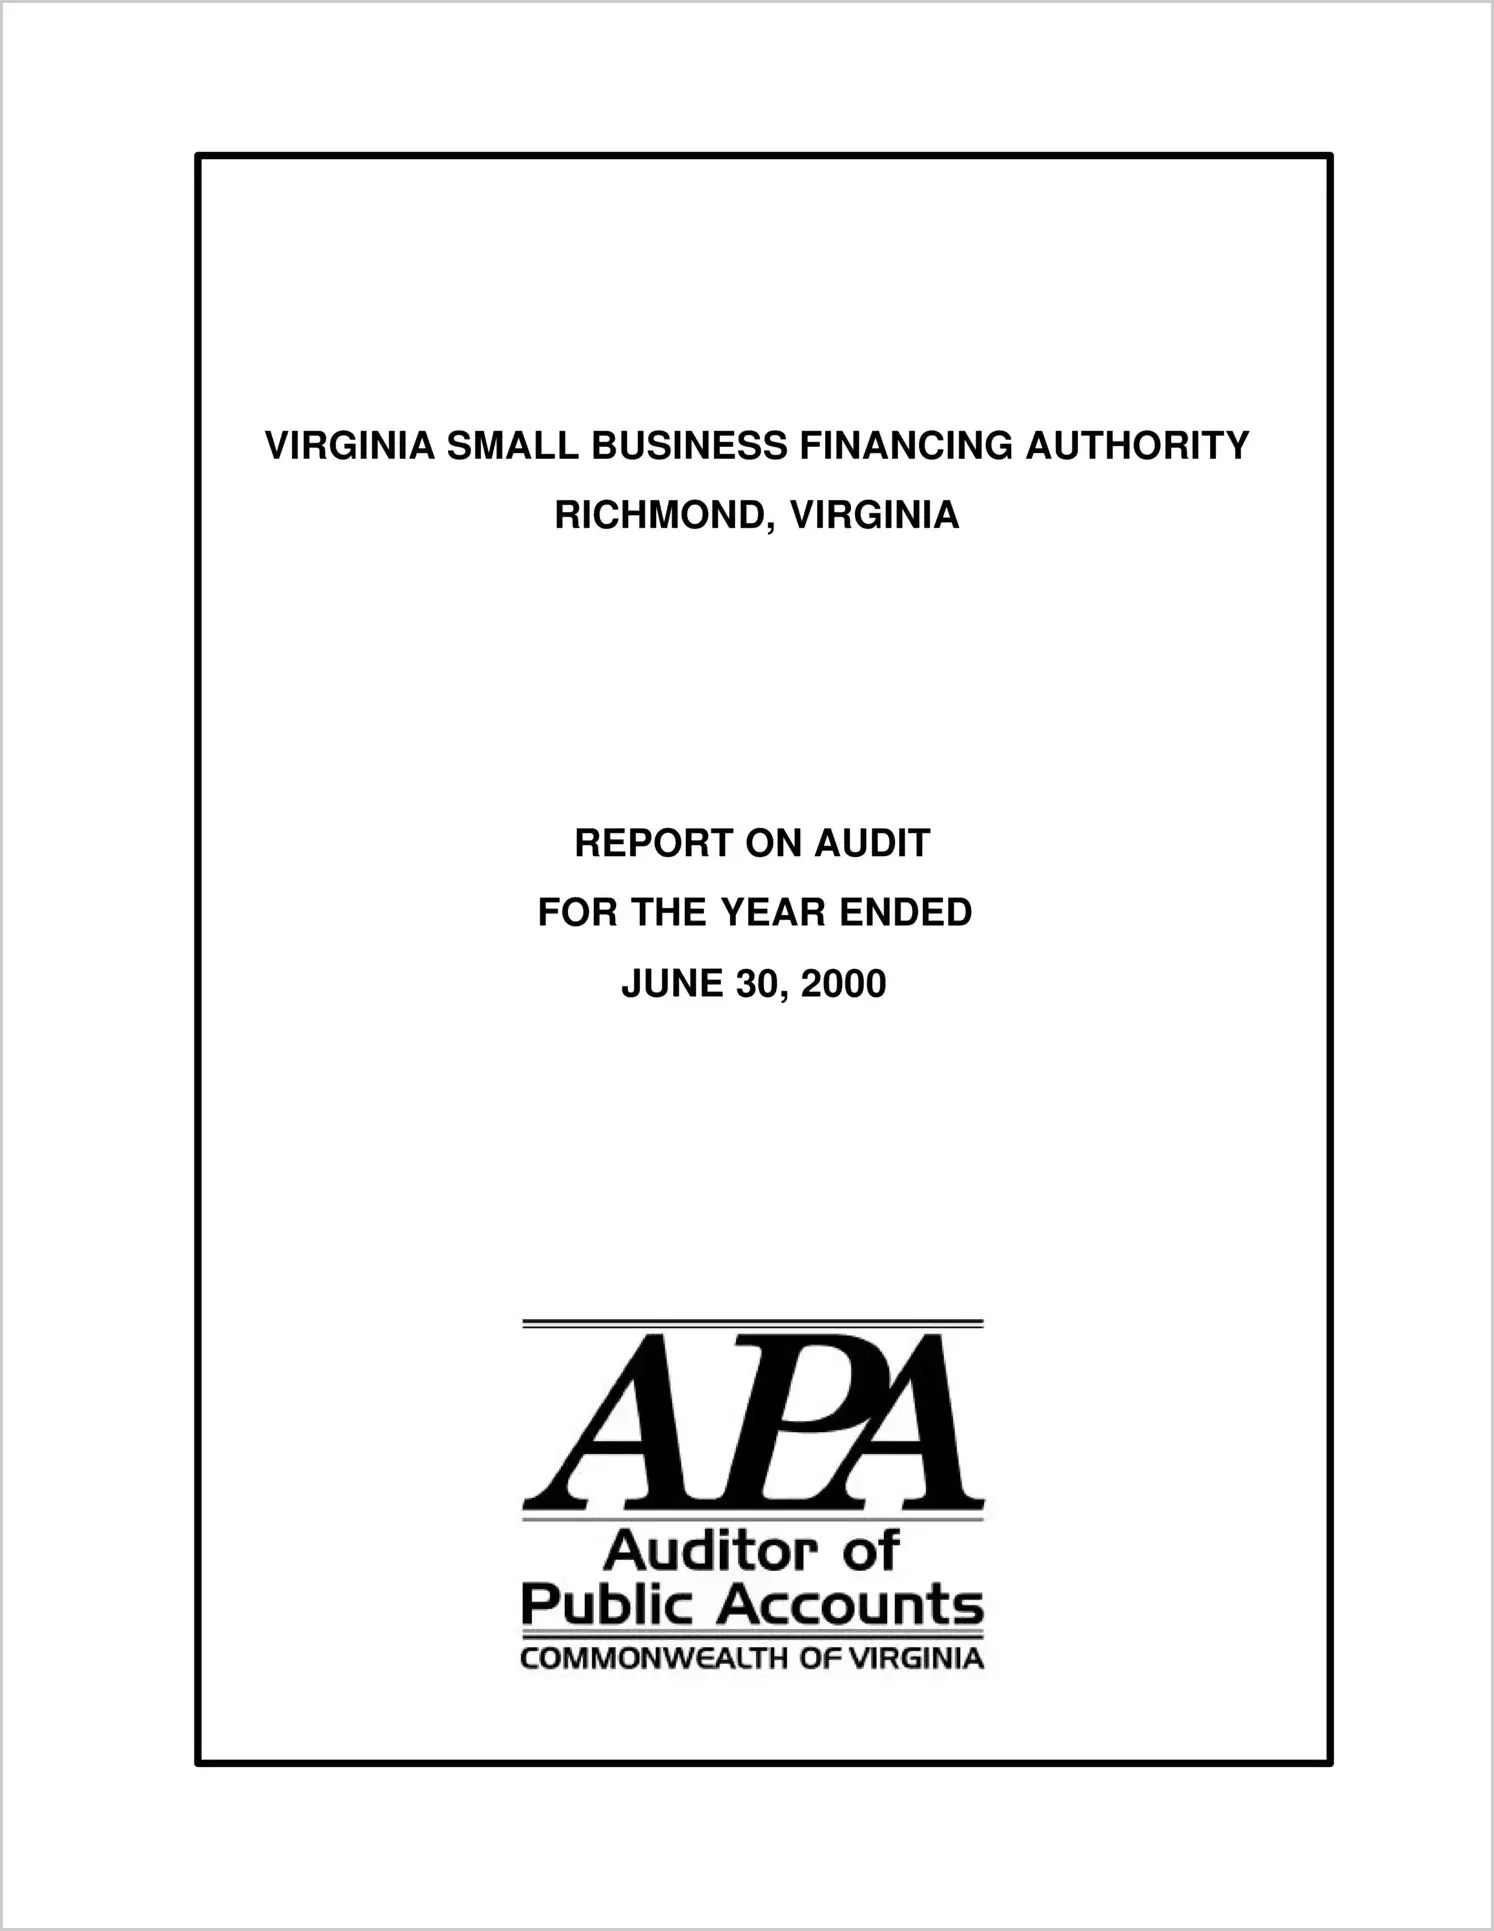 Virginia Small Business Financing Authority for the year ended June 30, 2000